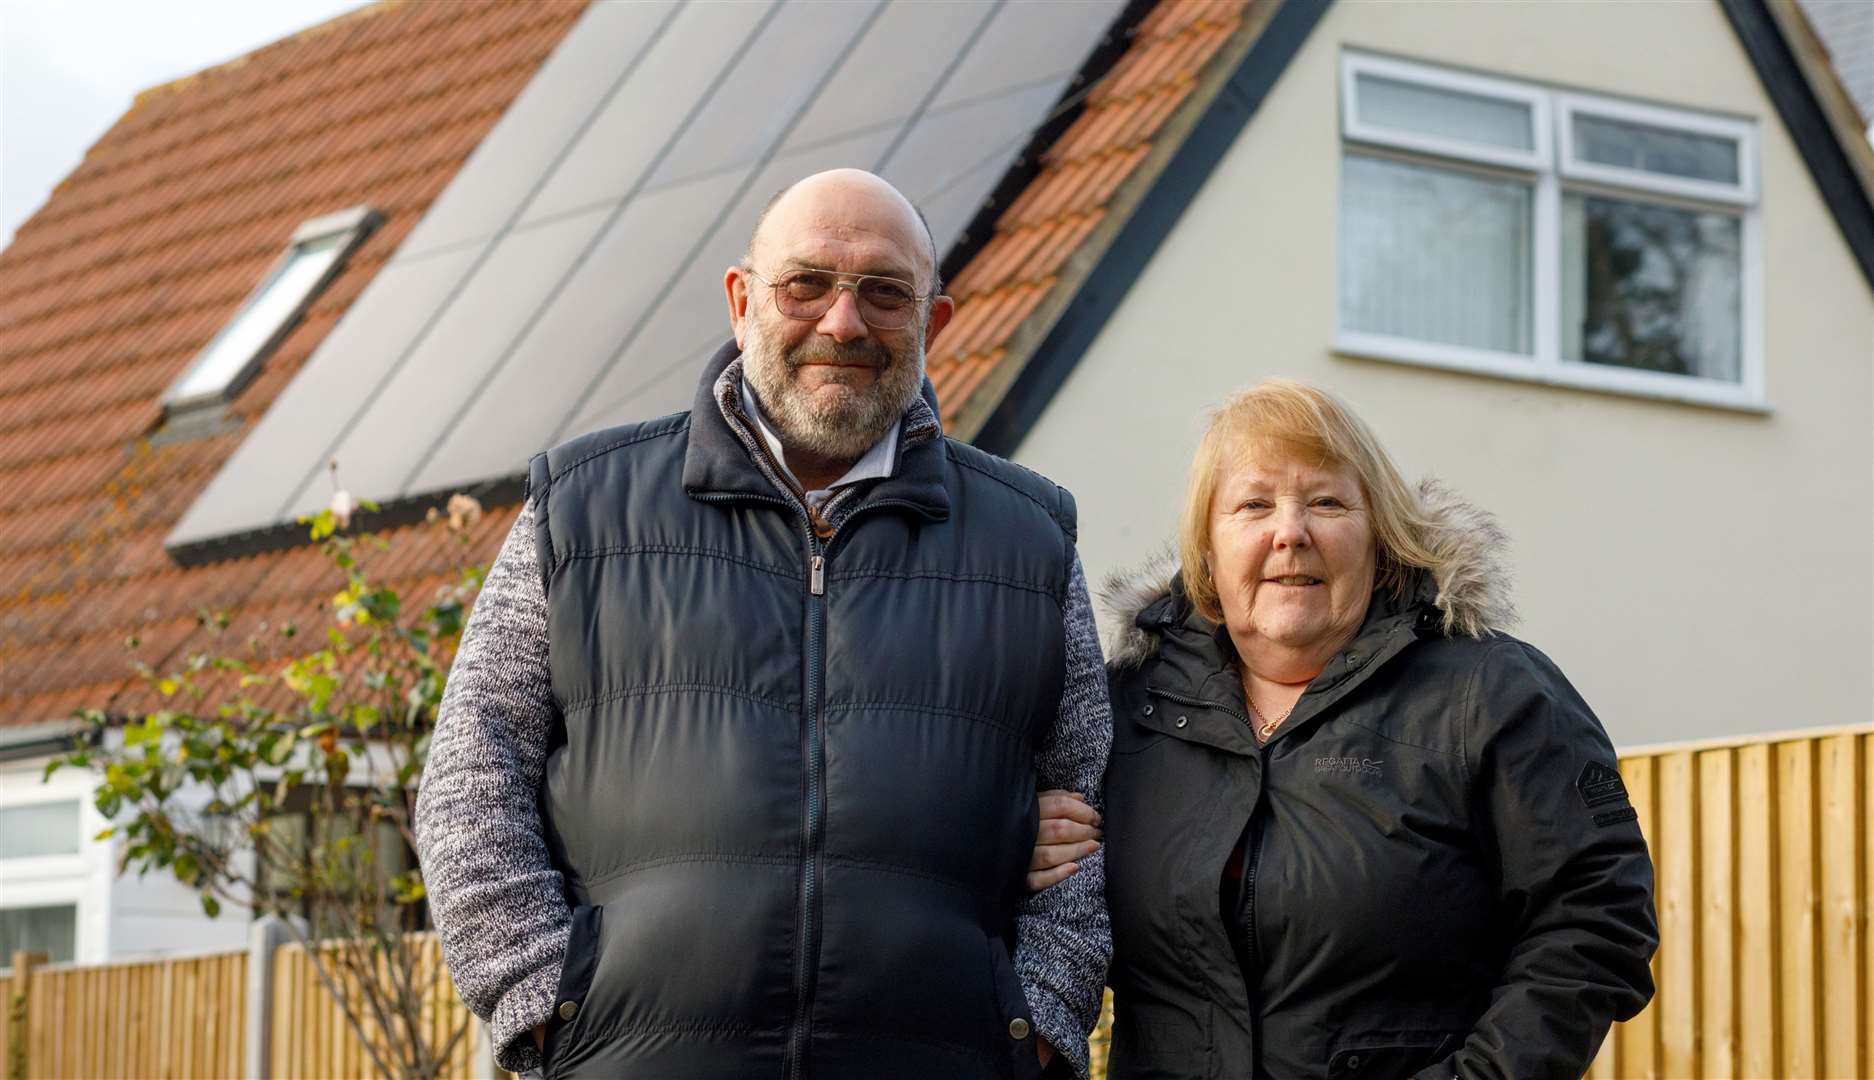 The Jenkins family's solar-powered home in Sheerness features 10 panels and a battery storage system installed through Solar Together. (Image: Solar Together)